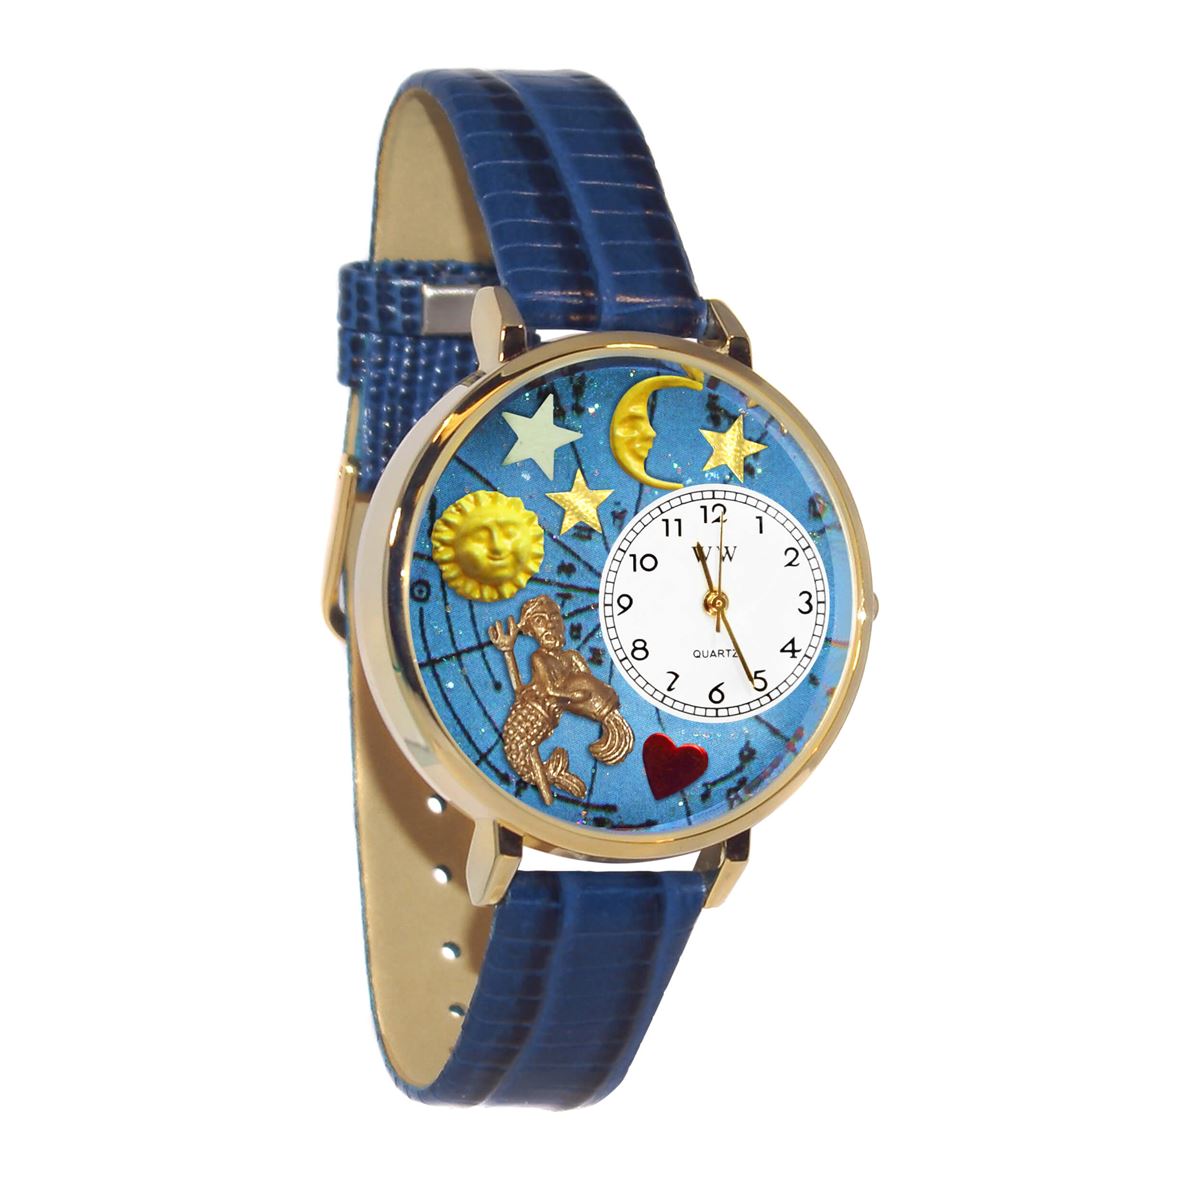 Whimsical Gifts | Aquarius Zodiac 3D Watch Large Style | Handmade in USA | Zodiac & Celestial |  | Novelty Unique Fun Miniatures Gift | Gold Finish Royal Blue Leather Watch Band